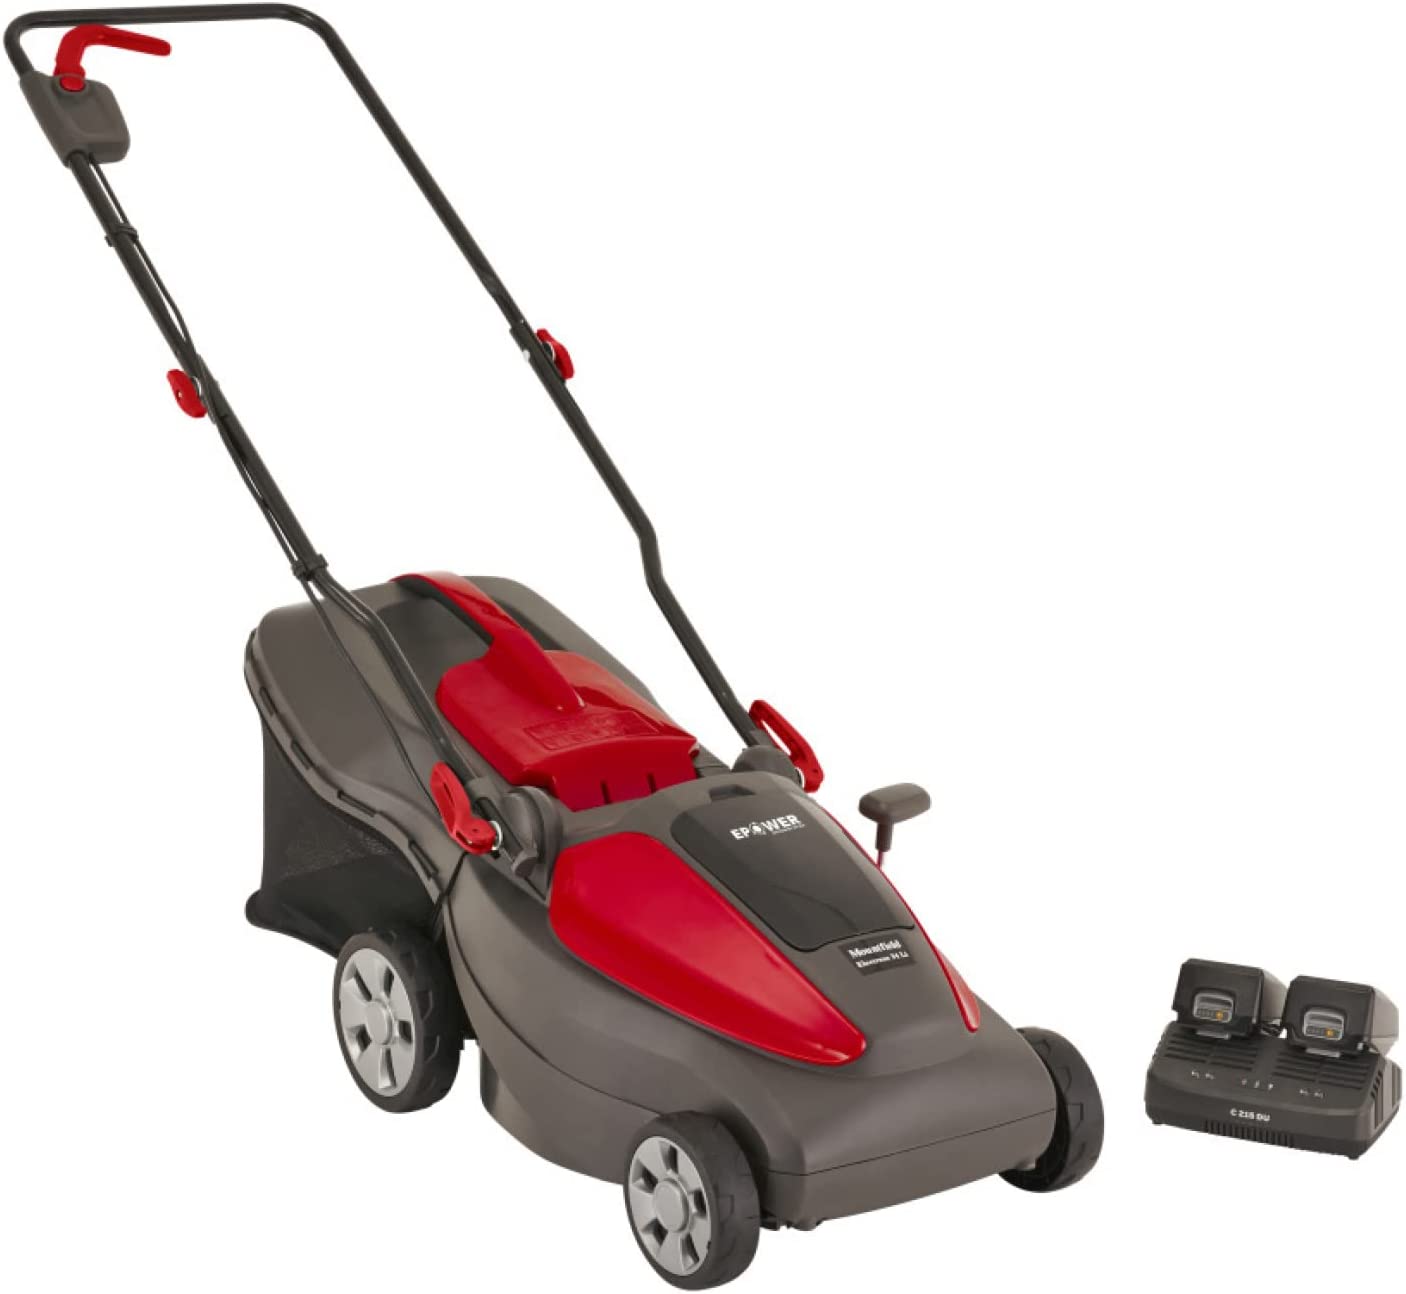 Mountfield Electress 34 Litre cordless lawnmower with battery